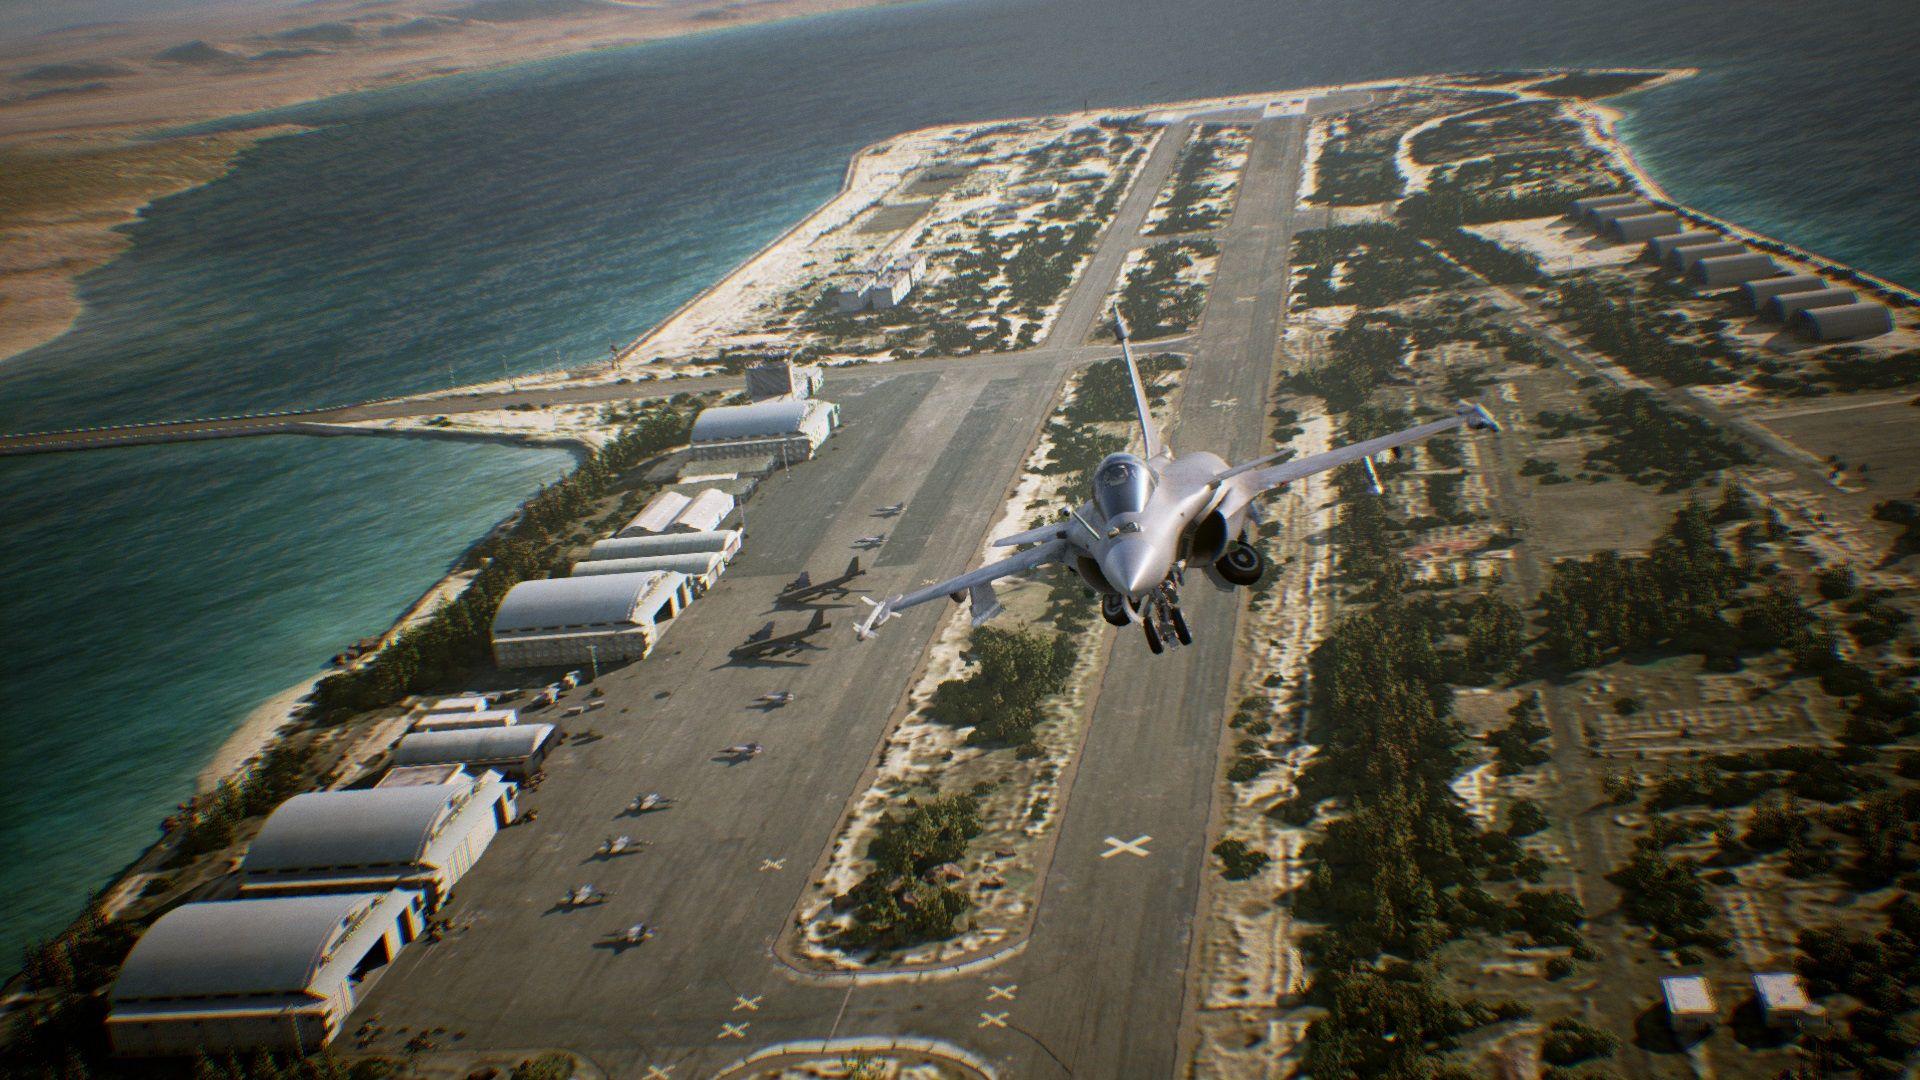 Preview: Ace Combat 7 Brings Pulse Pounding Aerial Dogfights To PS VR